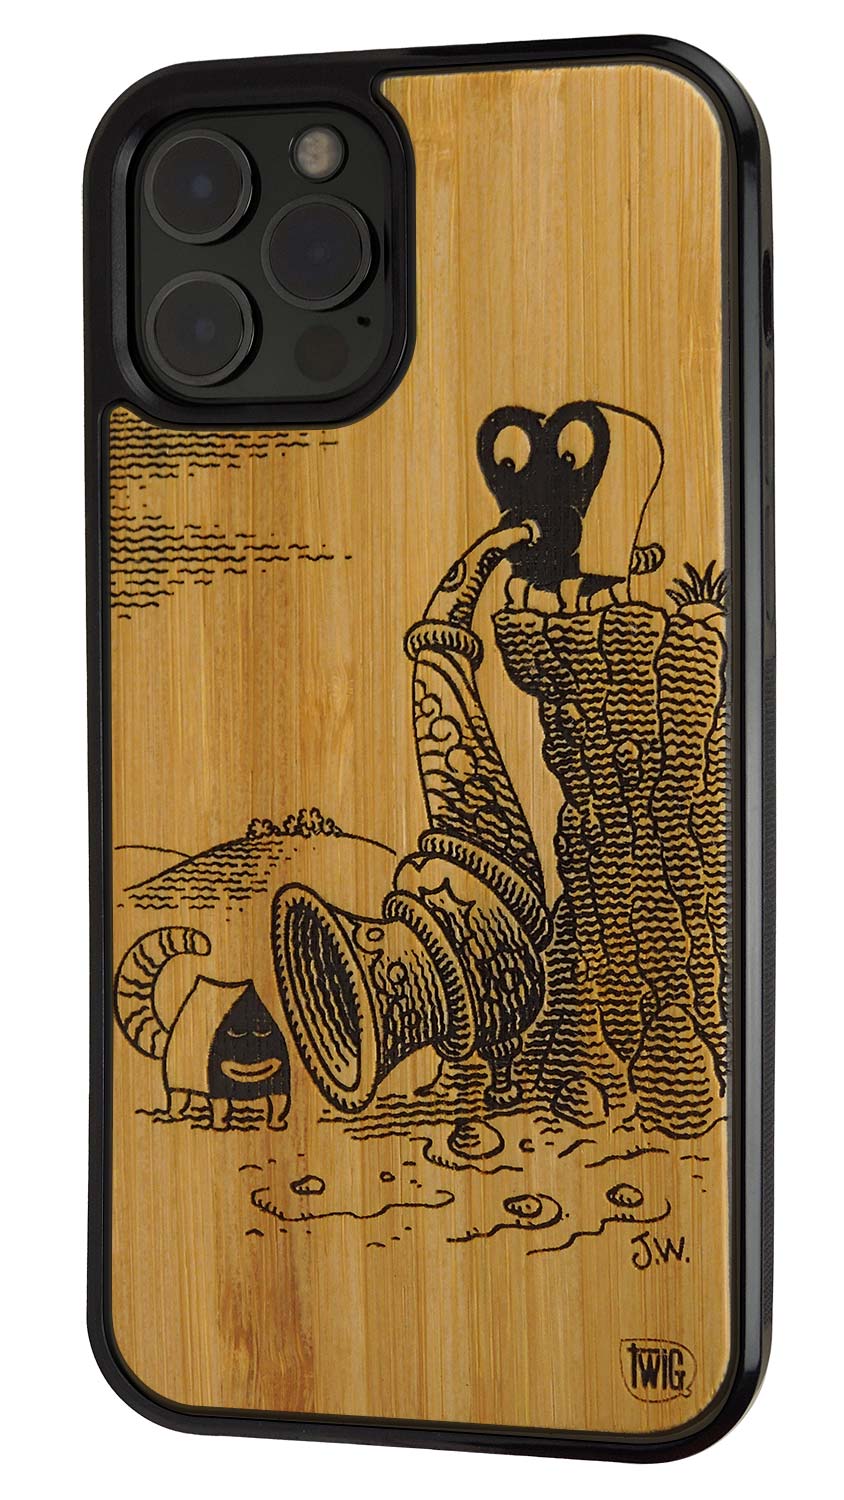 I Will Destroy You - Bamboo iPhone Case, iPhone Case - Twig Case Co.